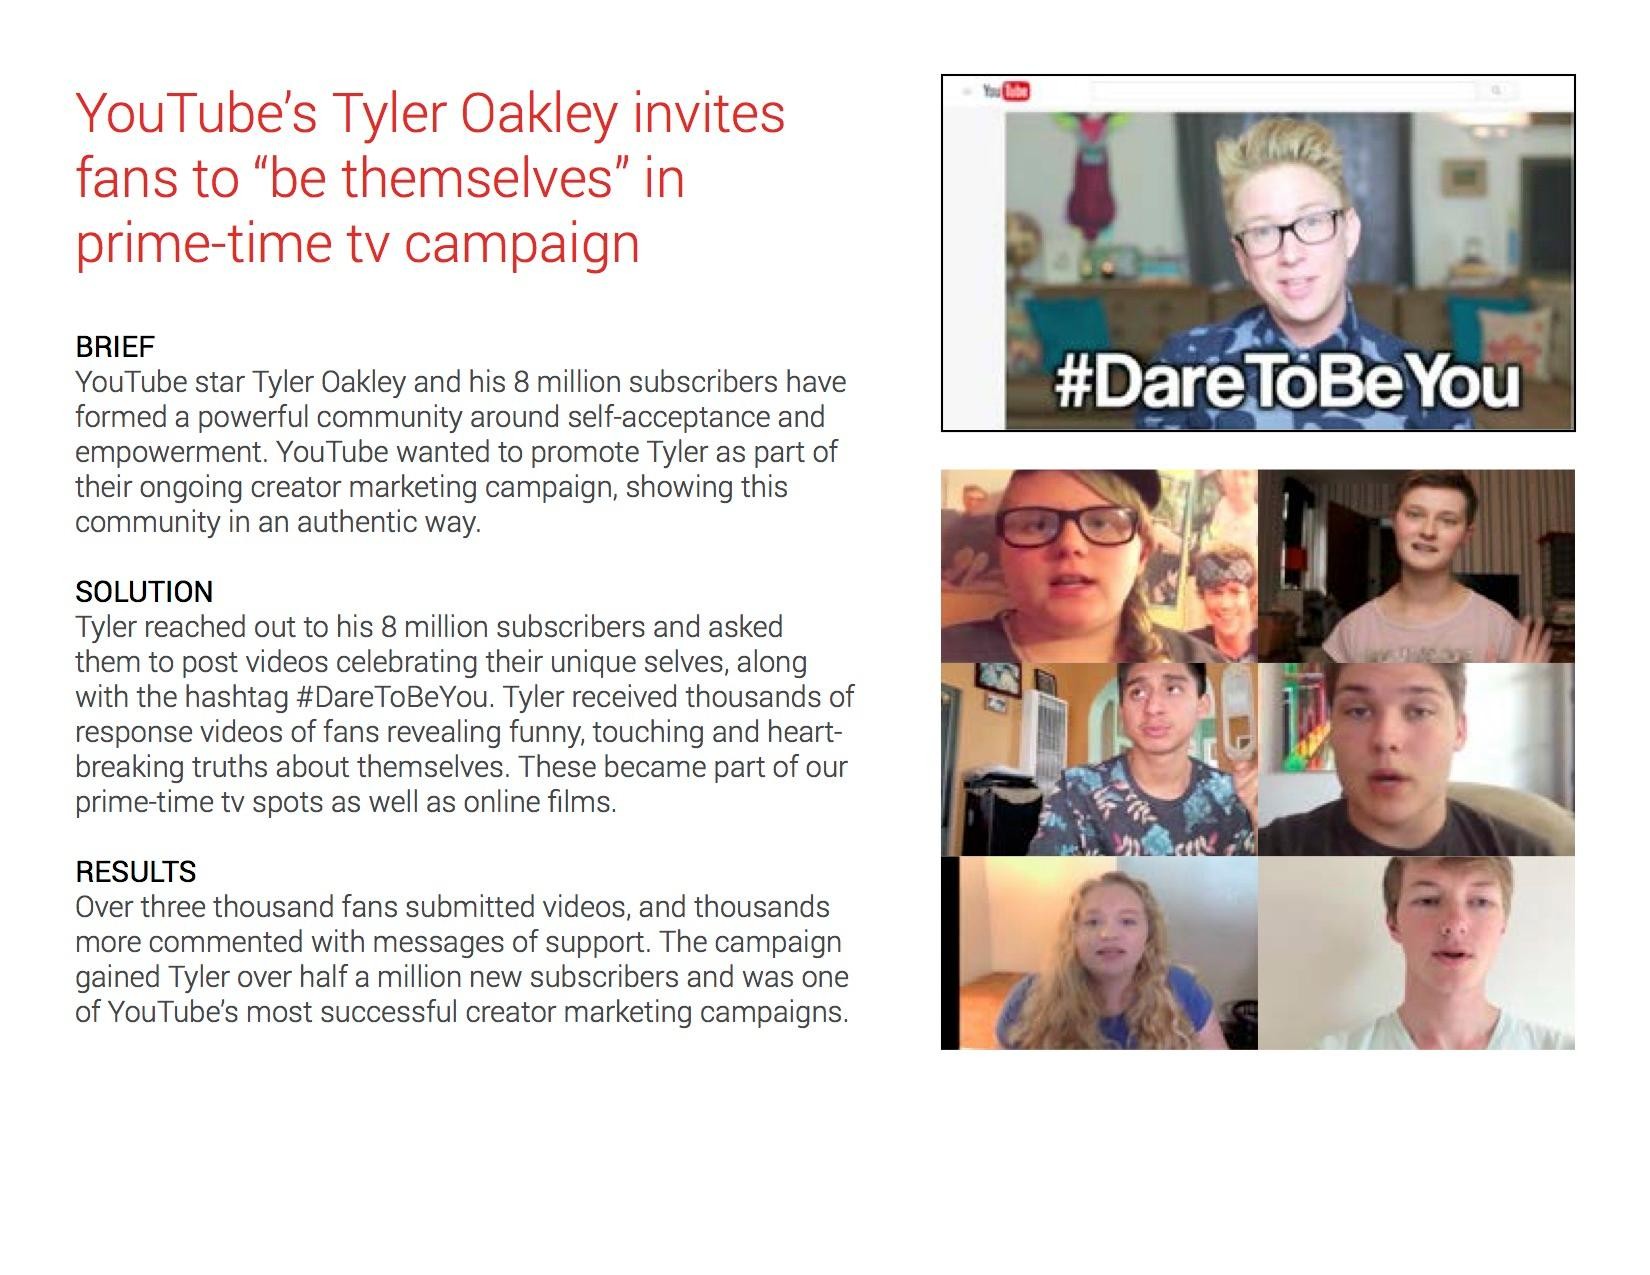 TYLER OAKLEY "DARE TO BE YOU"